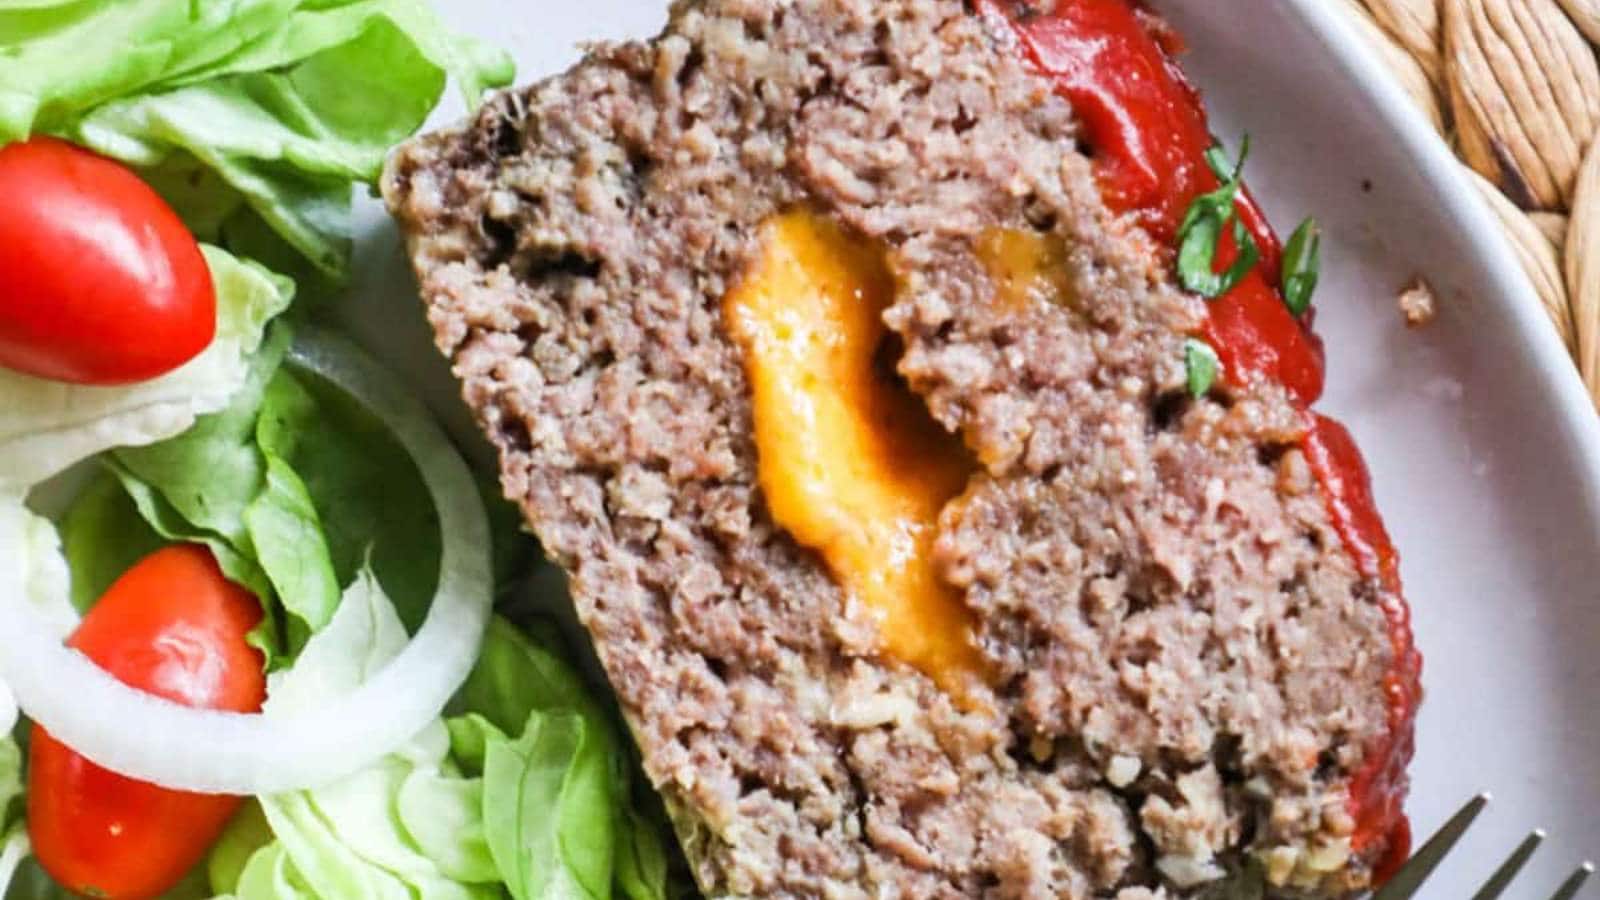 Cheeseburger Stuffed Meatloaf recipe by Easy Family Recipes.